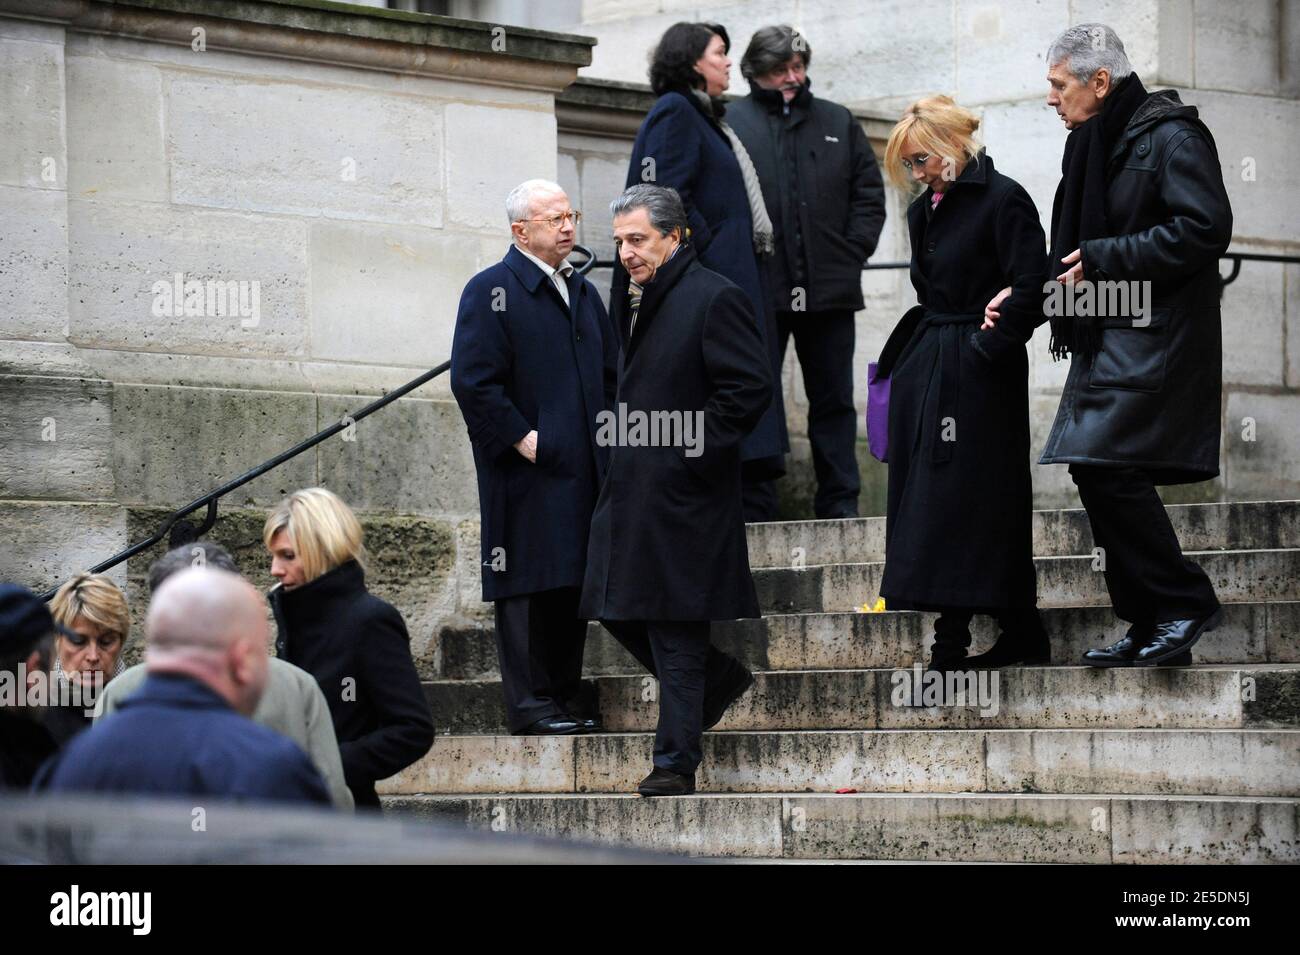 Christian Clavier, Marie-Anne Chazel with her boyfriend leaving Christian  Fechner's funeral ceremony held at Saint Roch church in Paris, France on  December 1st, 2008. Photo by Gorassini-Taamallah/ABACAPRESS.COM Stock Photo  - Alamy